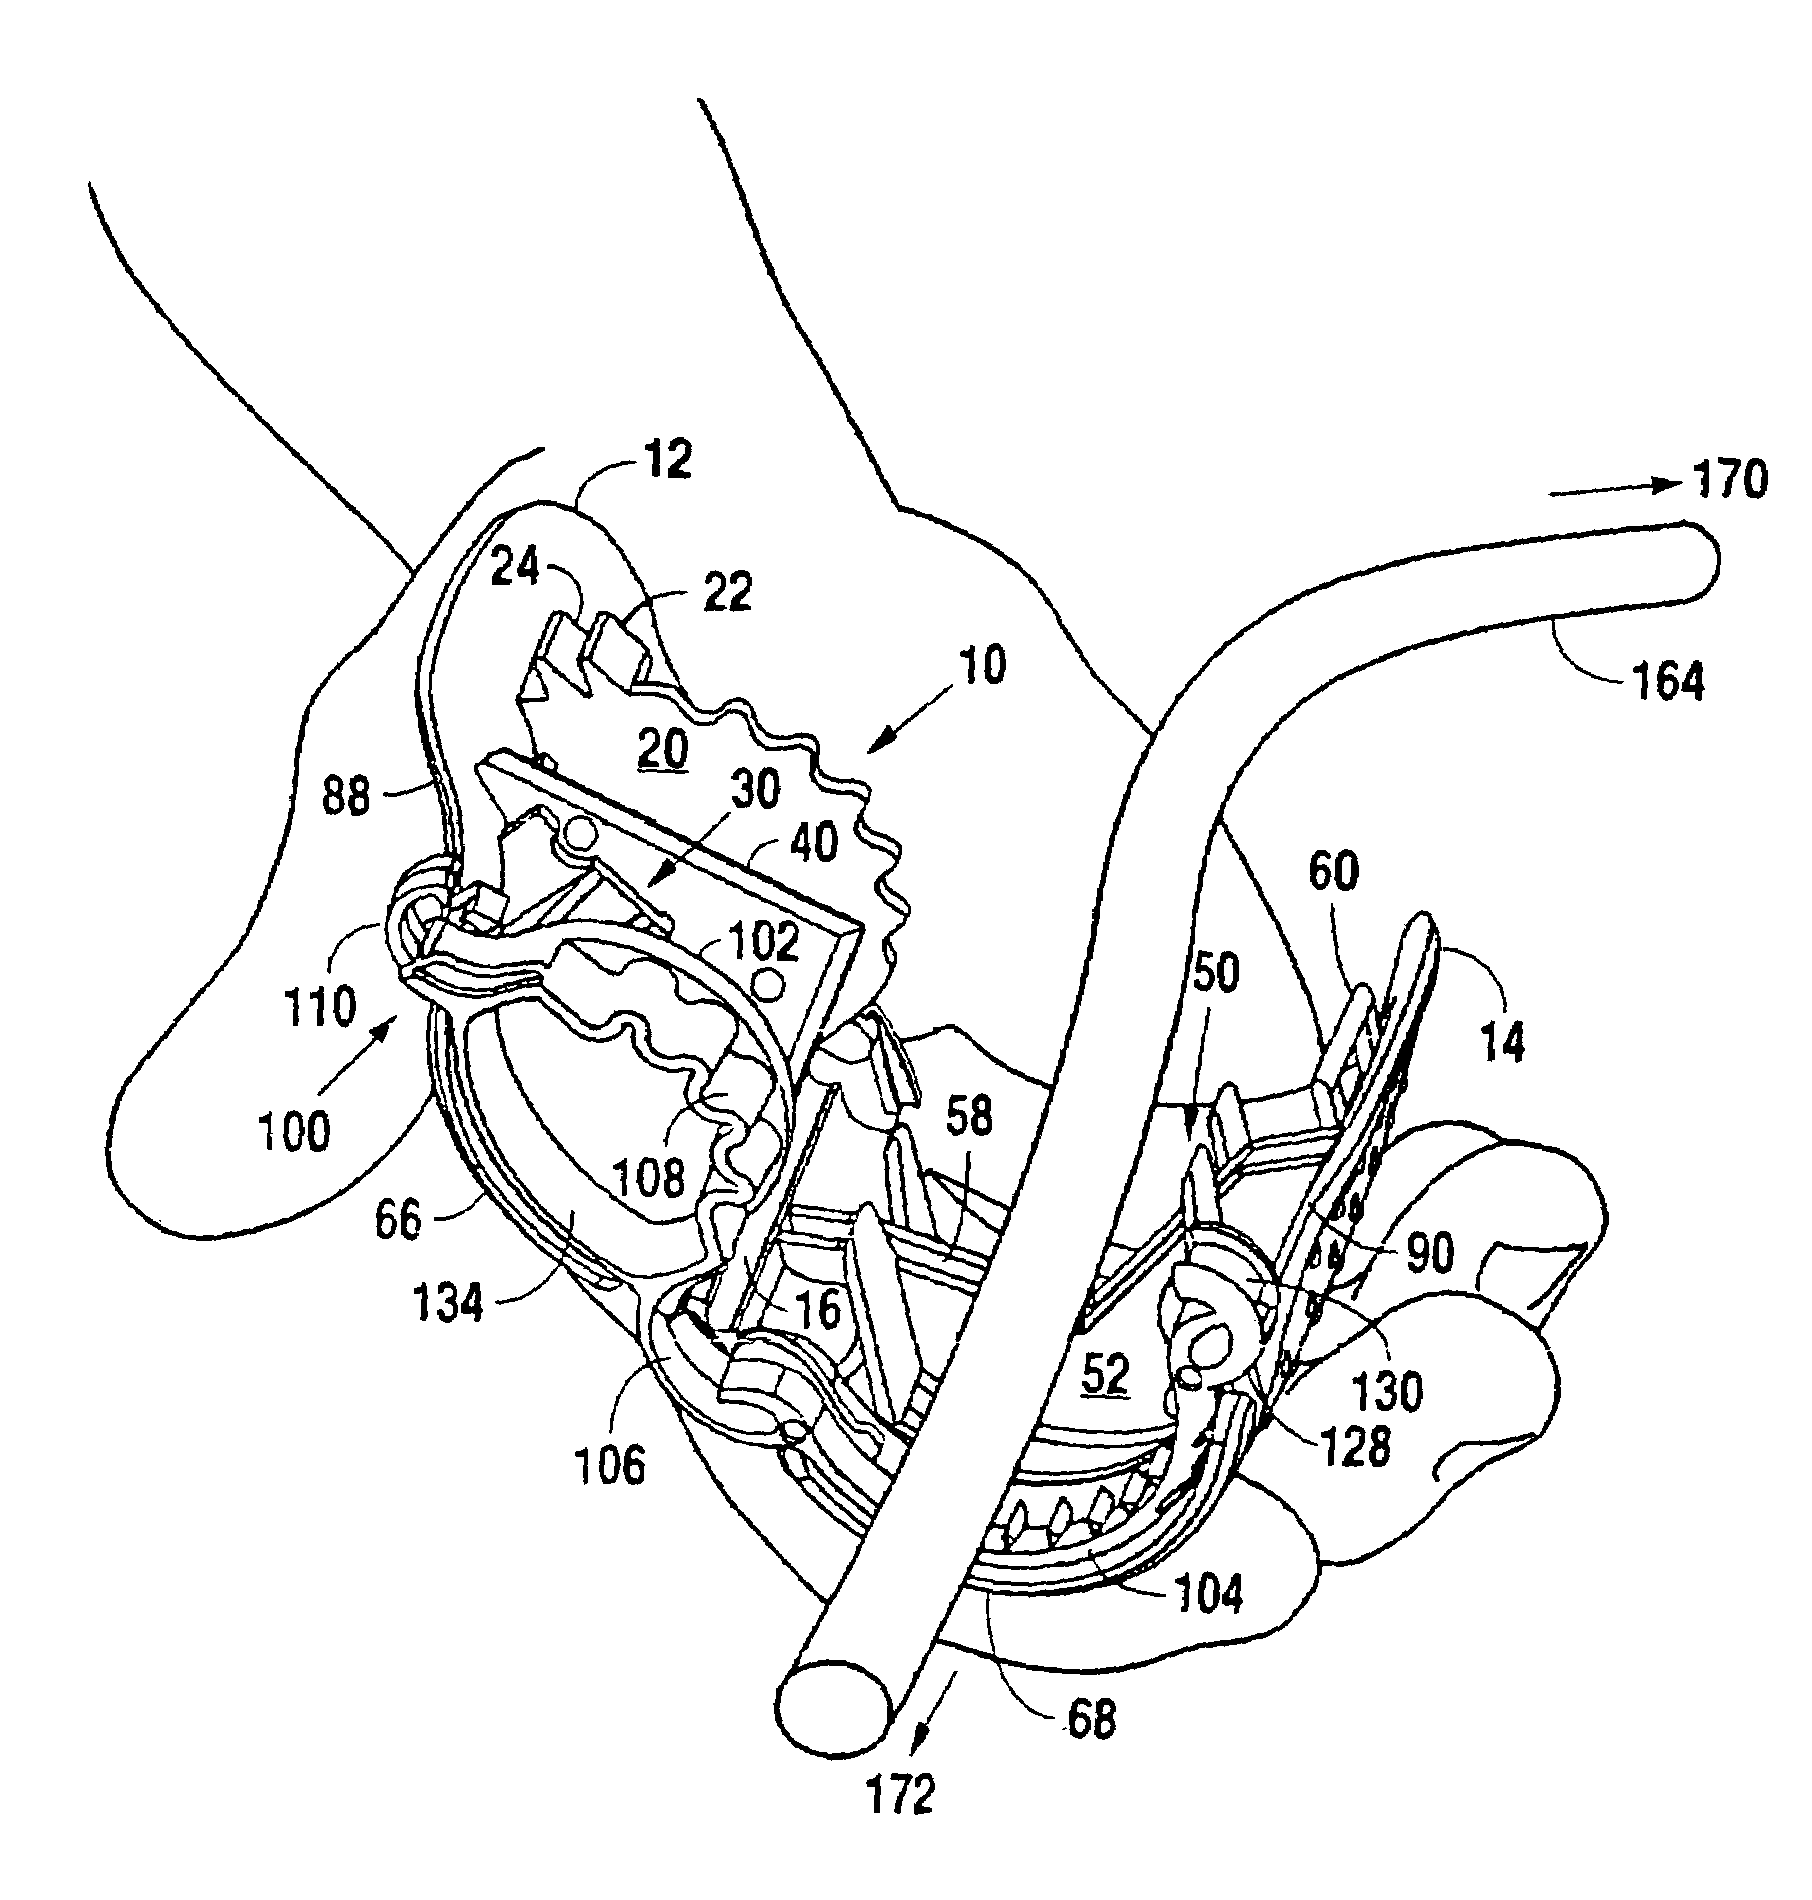 Umbilical cord clamp and cutter